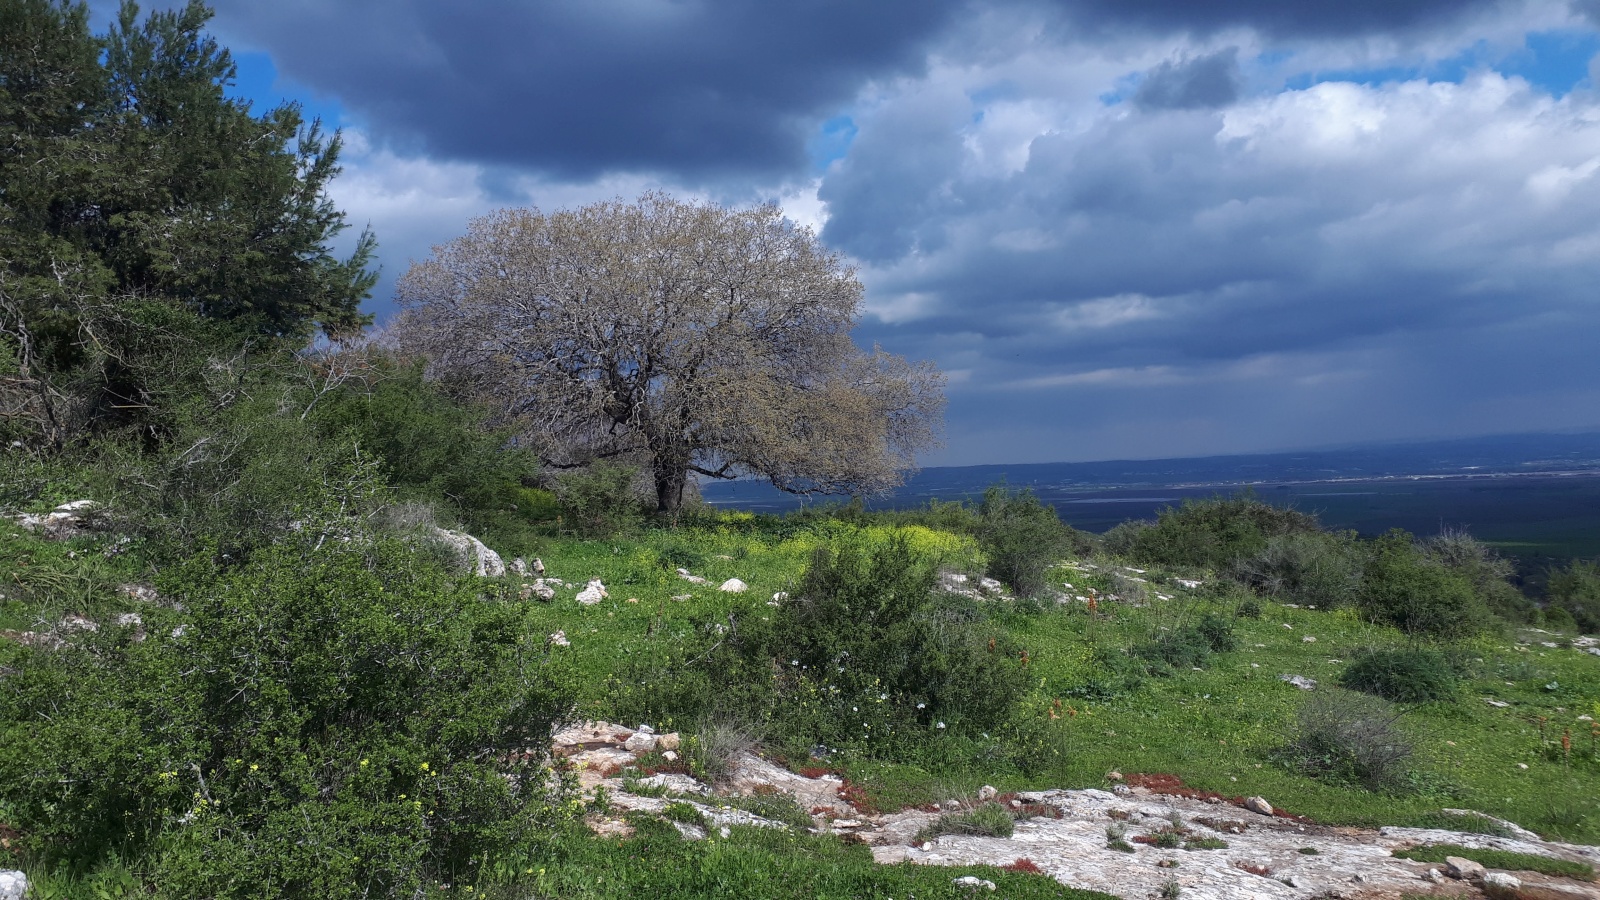 The view along the Ramot Menashe Biosphere Reserve trail. Photo by Itzik Ben Dov/Society for the Protection of Nature in Israel